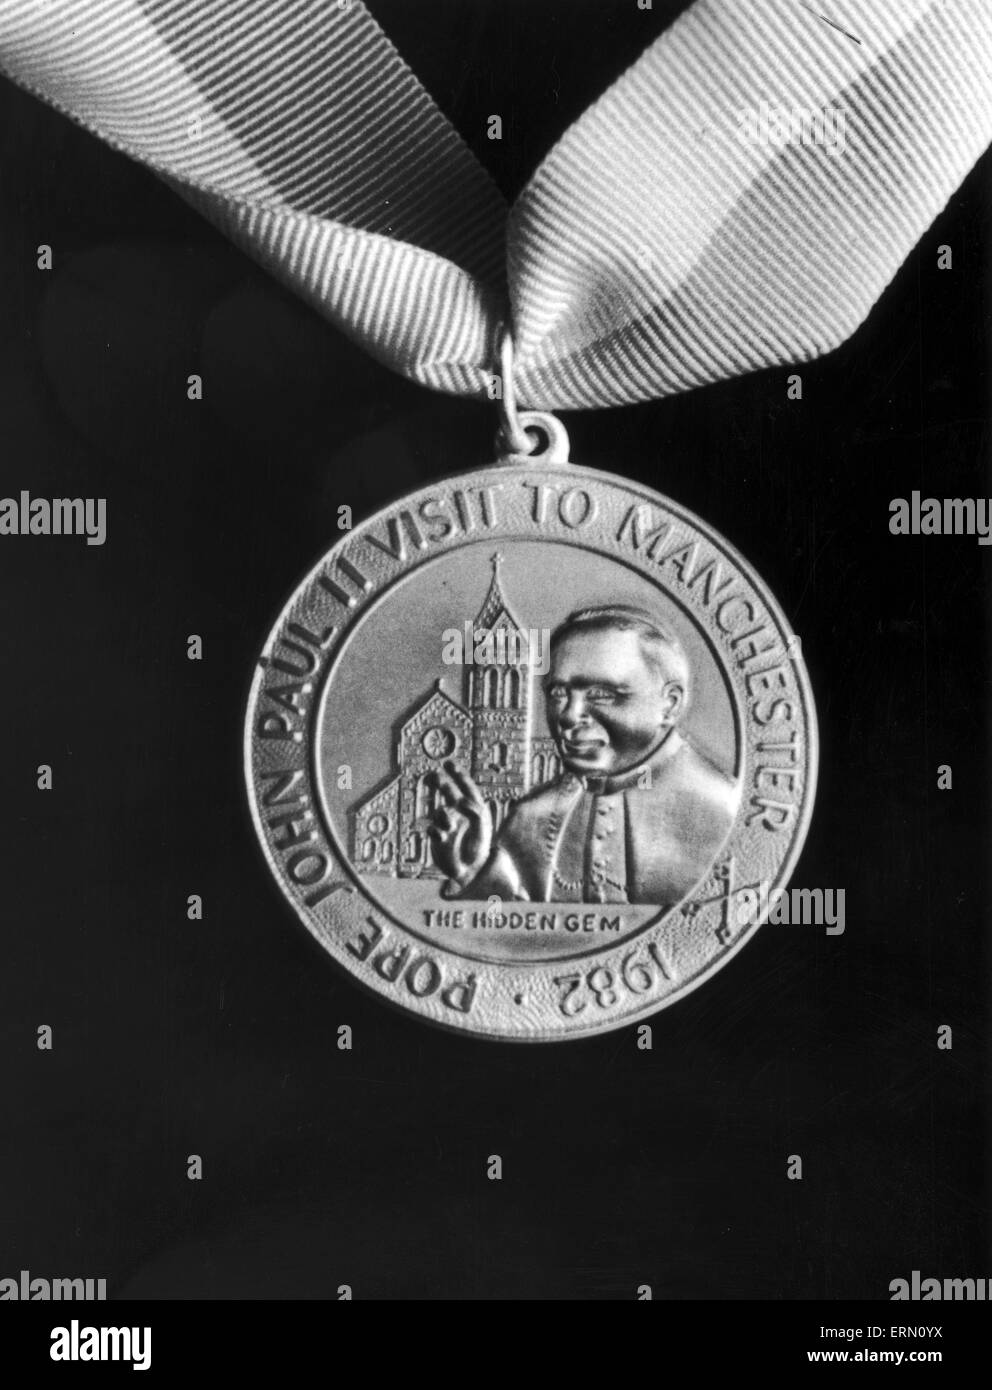 Platinum medal showing Manchester's Hidden Gem Church, will be presented to Pope John Paul II during his visit to Manchester on 31st  May 1982, pictured 18th May 1982. Stock Photo